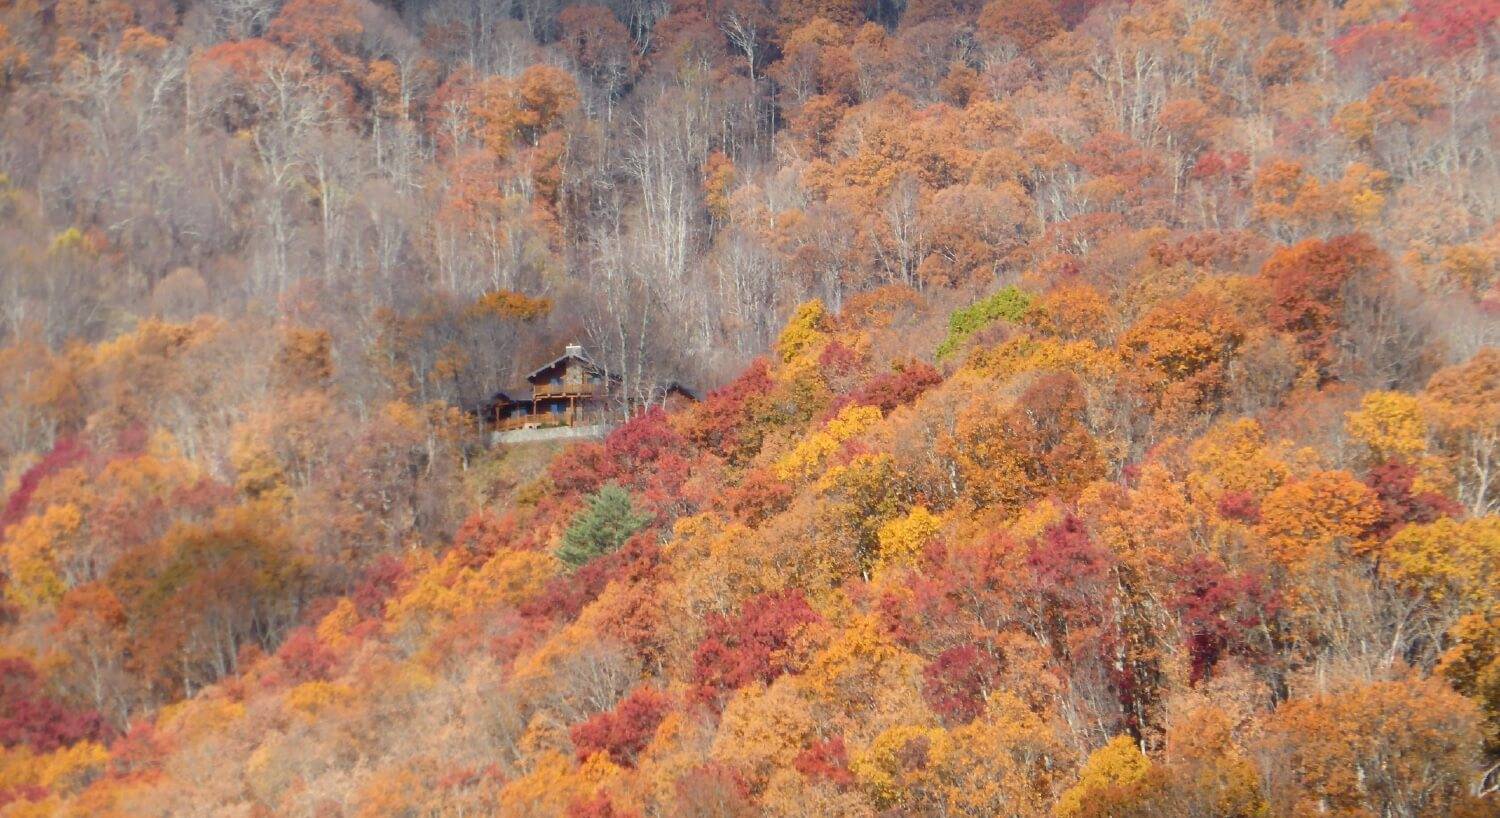 View of a large home nestled in a forest of orange and yellow fall-colored trees